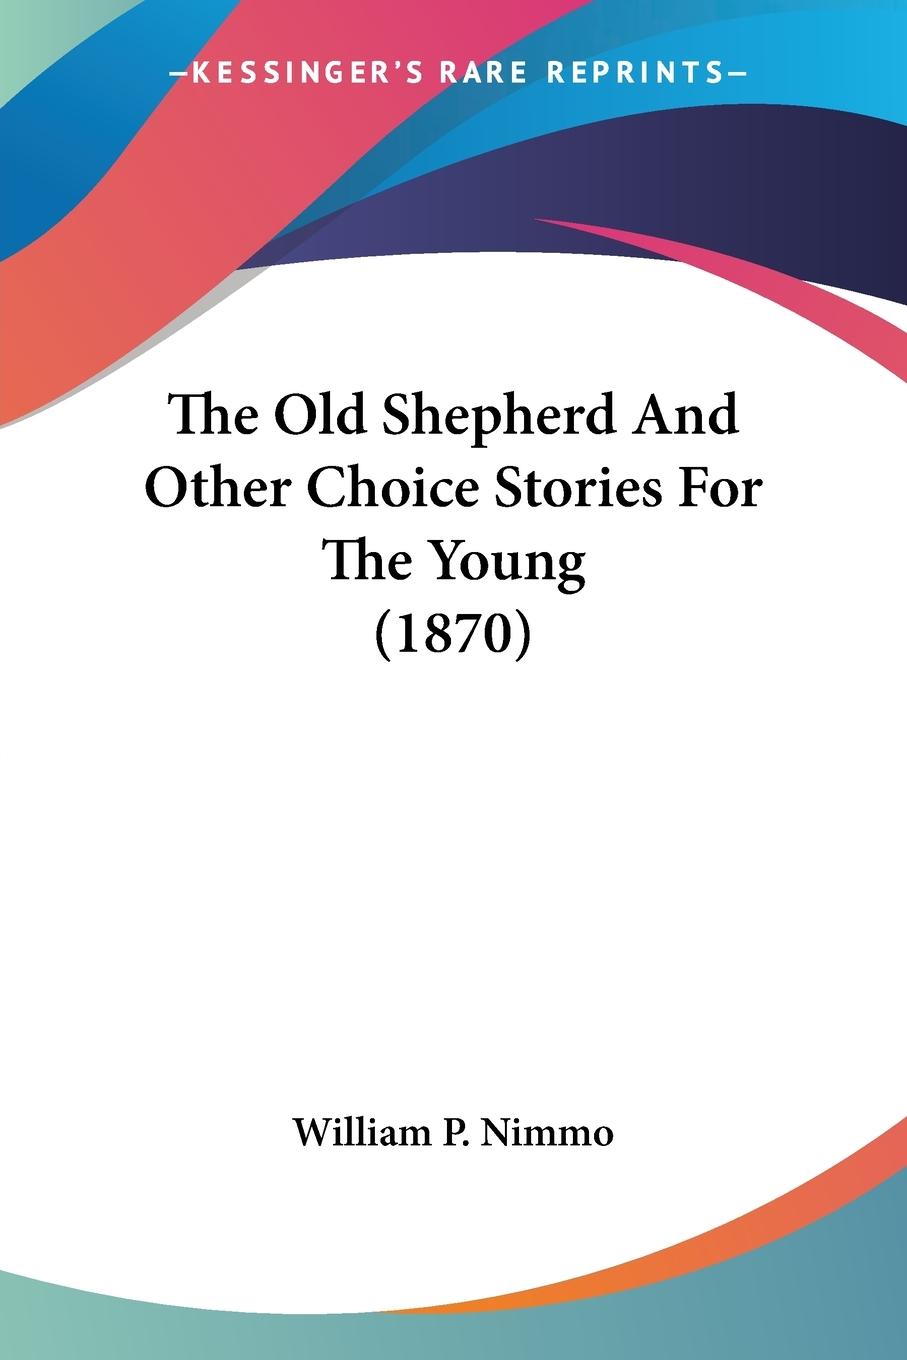 The Old Shepherd And Other Choice Stories For The Young (1870)